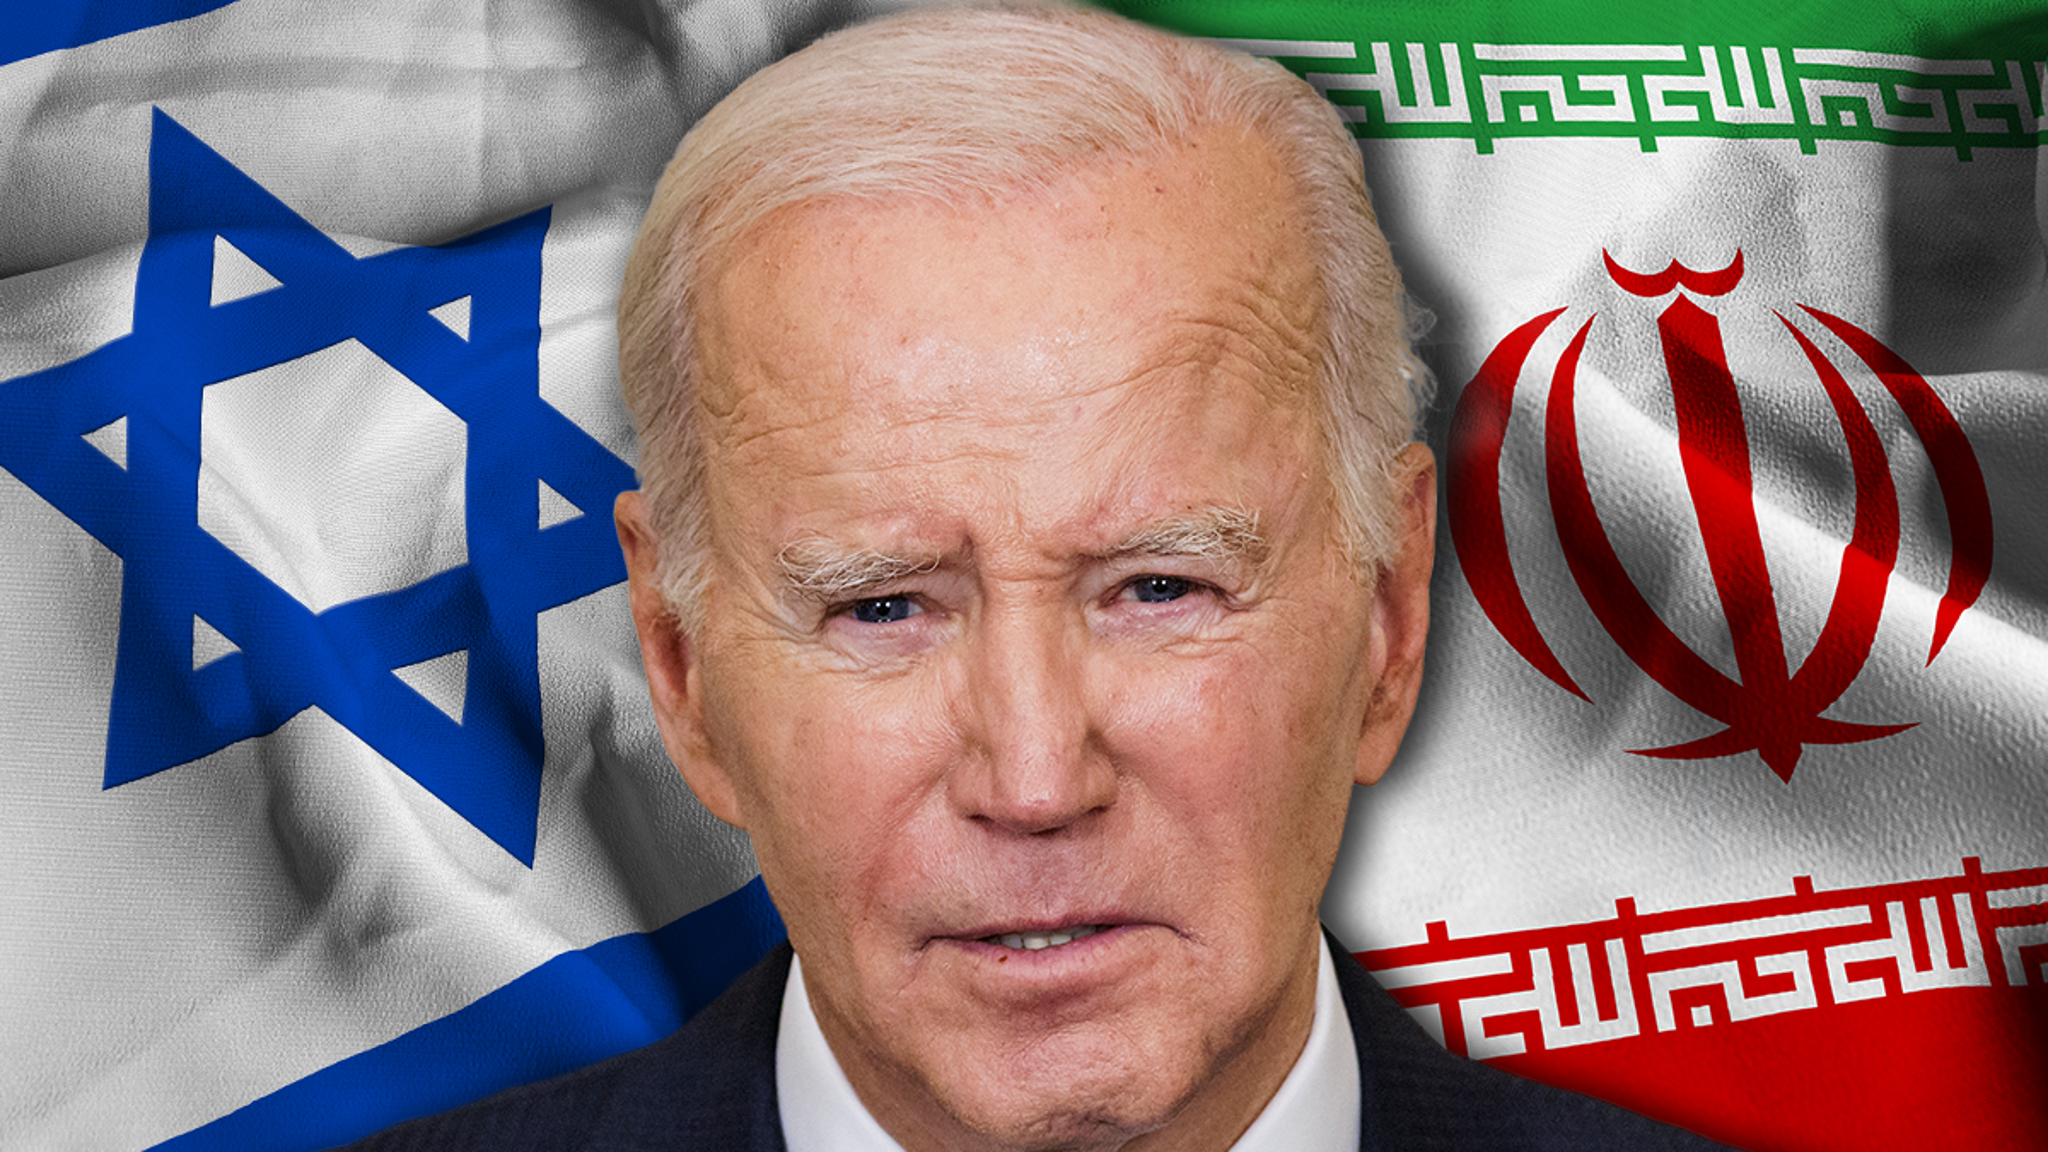 Biden Administration On Notice After Bombshell Report on Iran-Israel